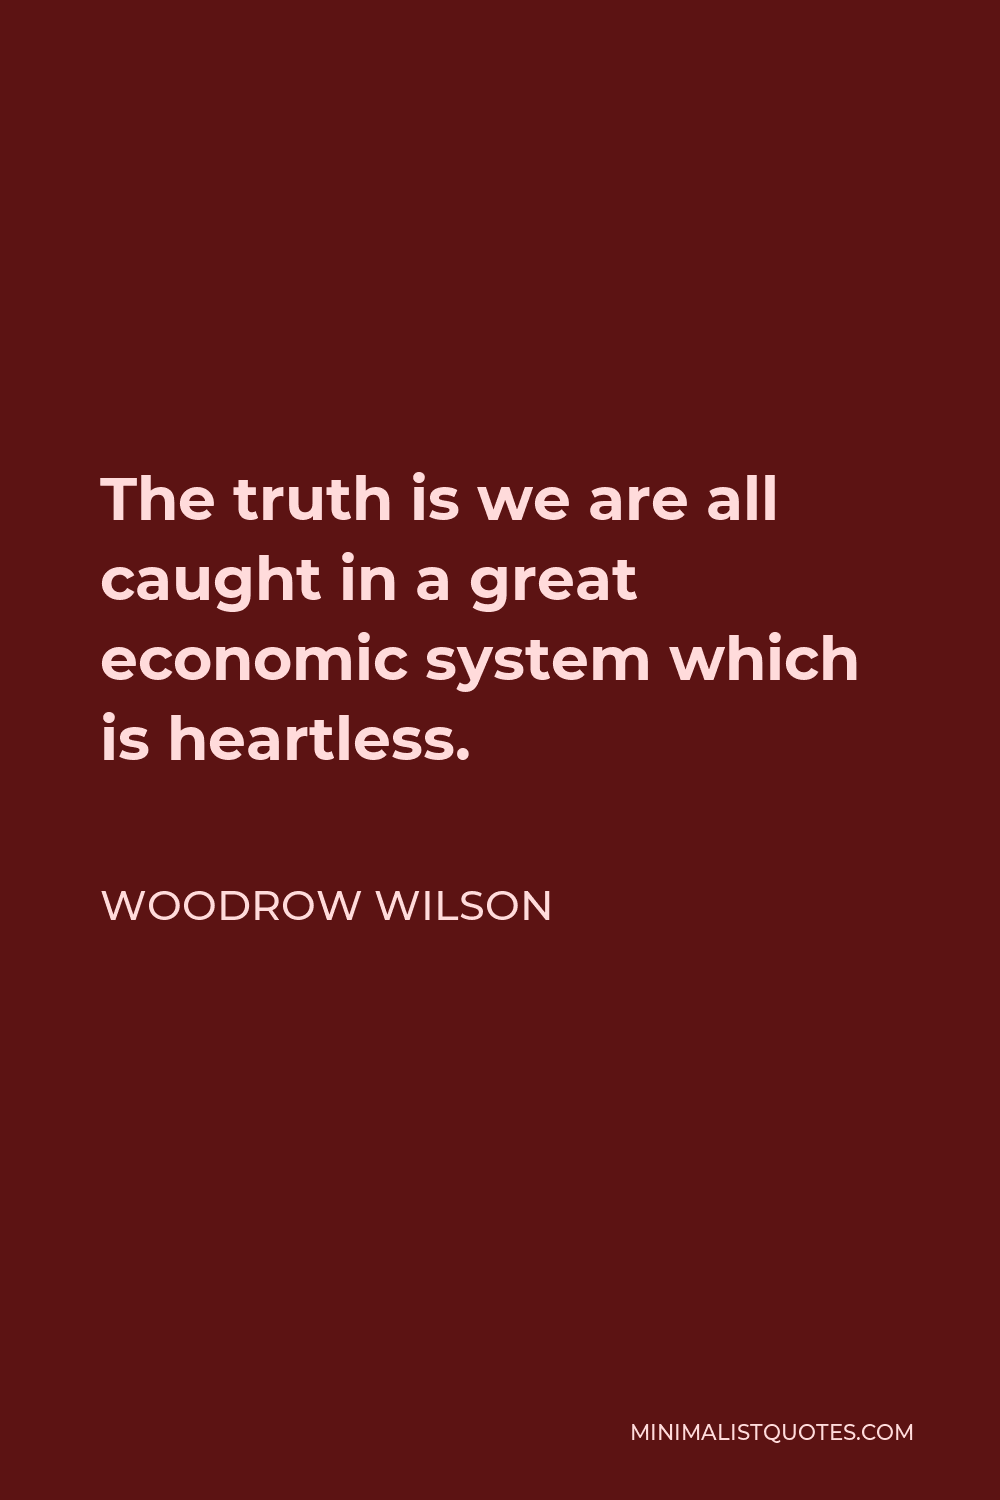 Woodrow Wilson Quote - The truth is we are all caught in a great economic system which is heartless.